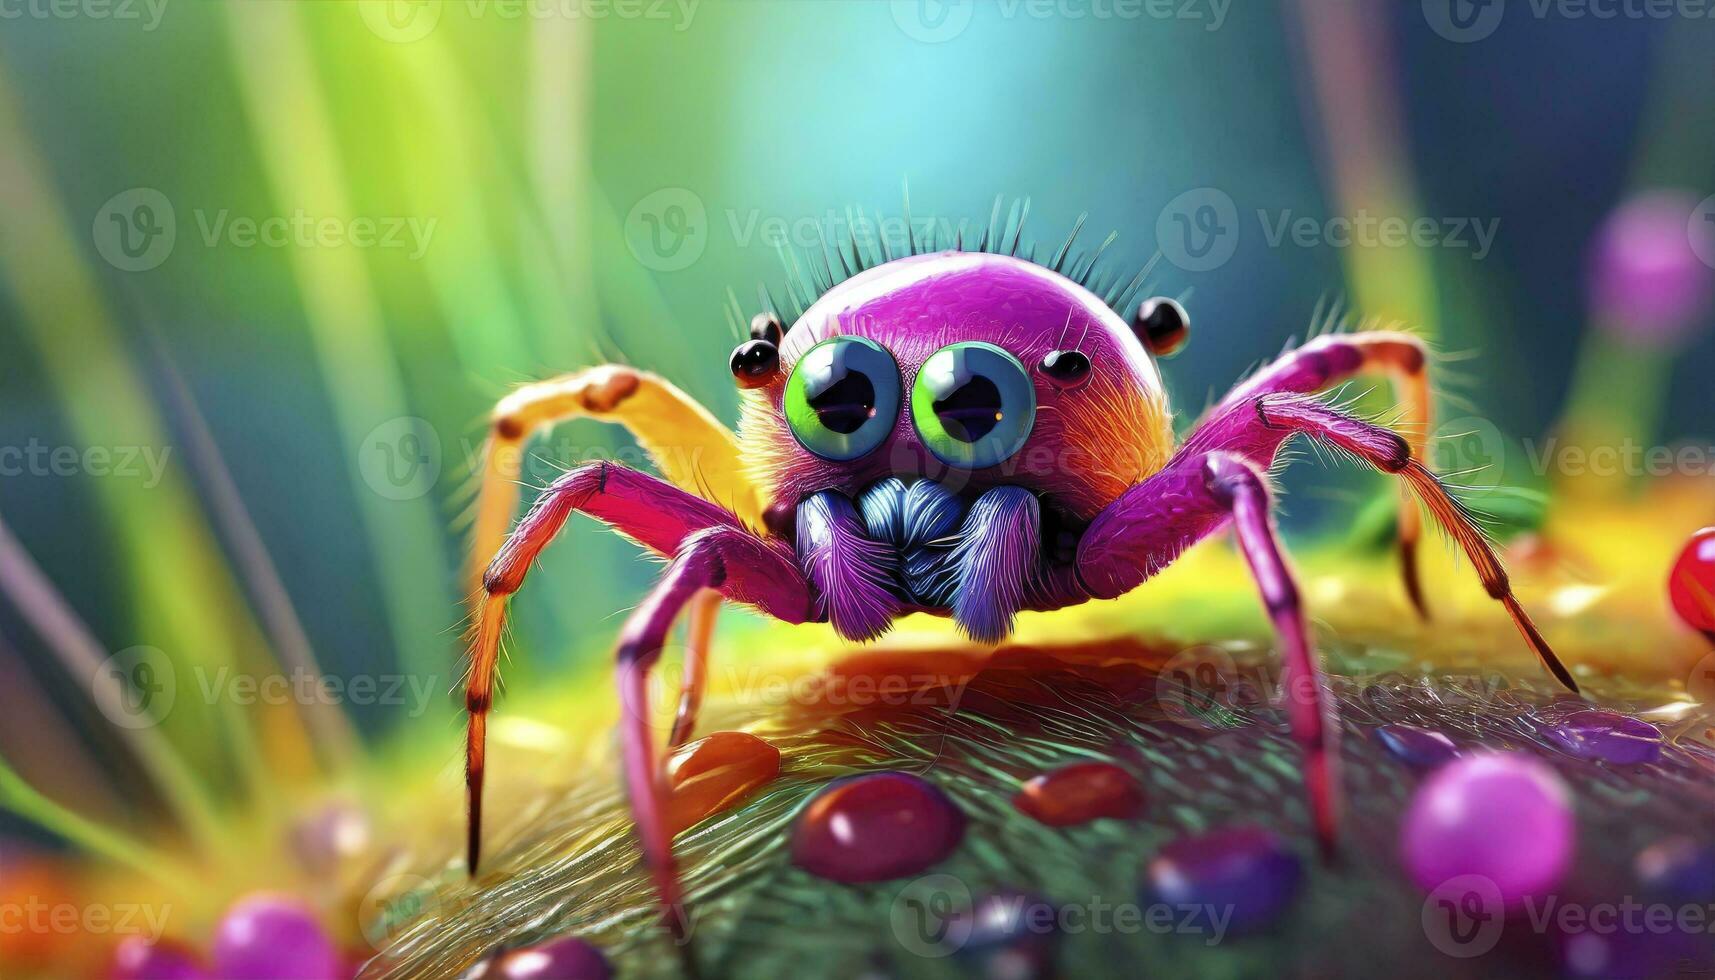 AI generated Micro Marvel. A Closeup Macro Photo Capturing the Tiny, Cute, and Adorable Colors of a Spider, Unveiling the Beauty in the Small Wonders of Nature.